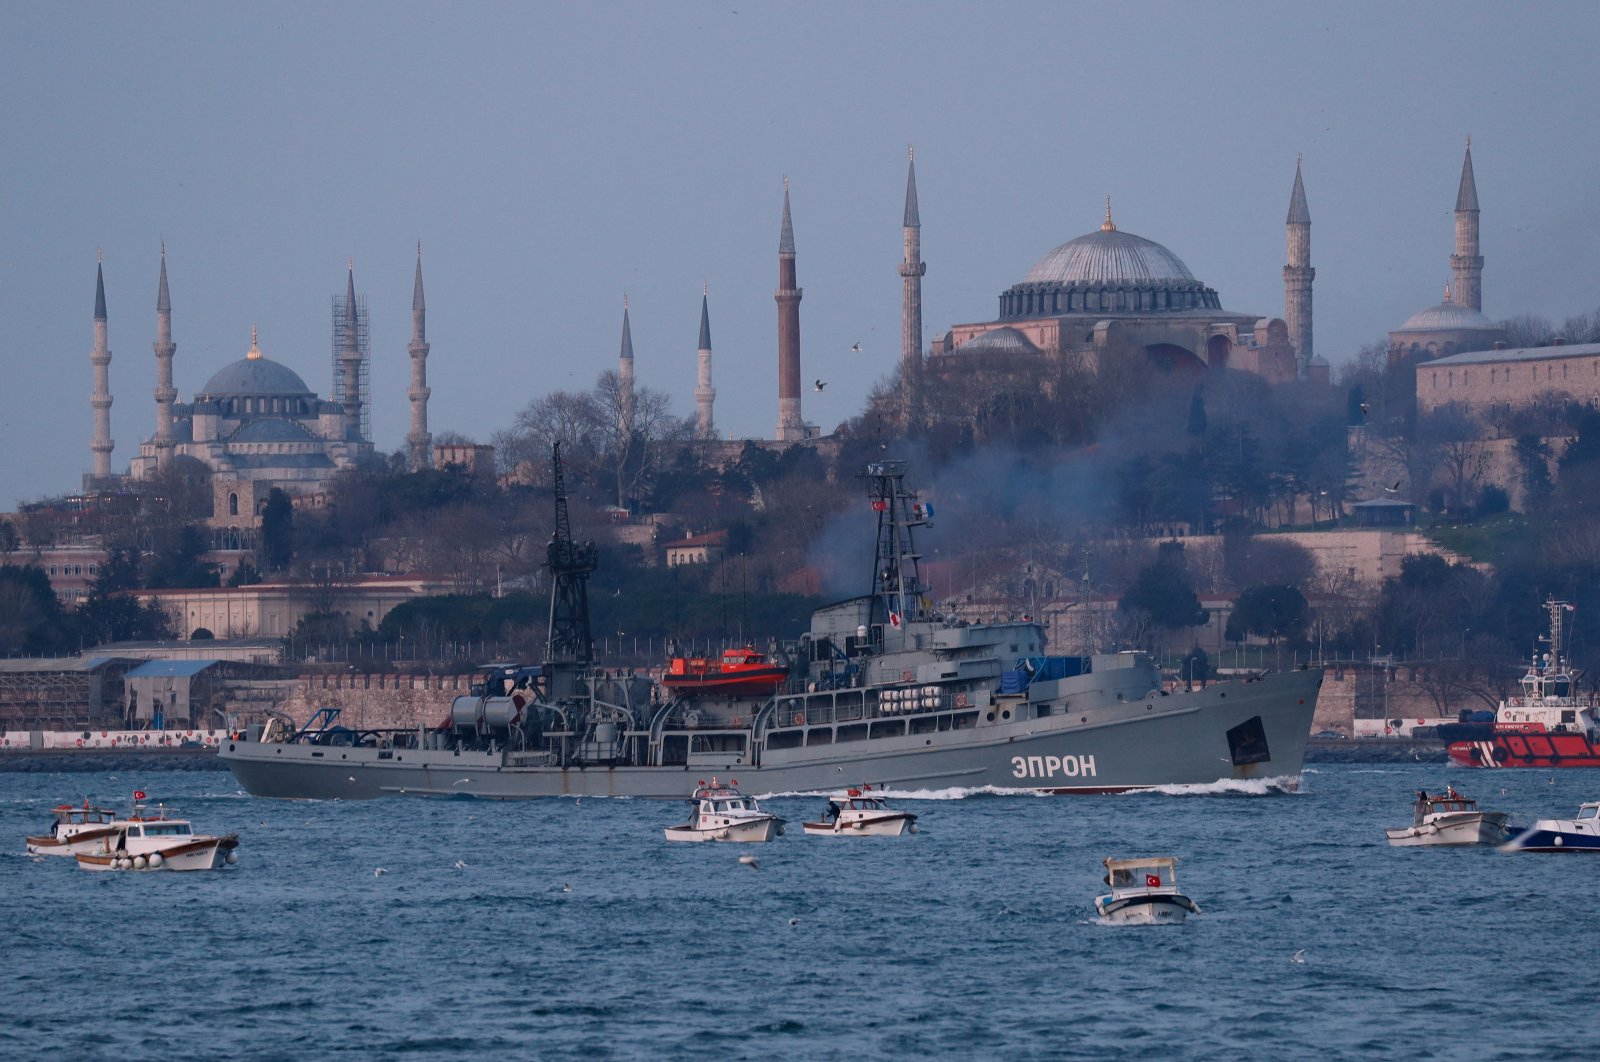 The Russian navy&#039;s Black Sea fleet rescue tug EPRON sails in the Bosporus, on its way to the Black Sea, in Istanbul, Turkey, Feb. 17, 2022. (Reuters Photo)